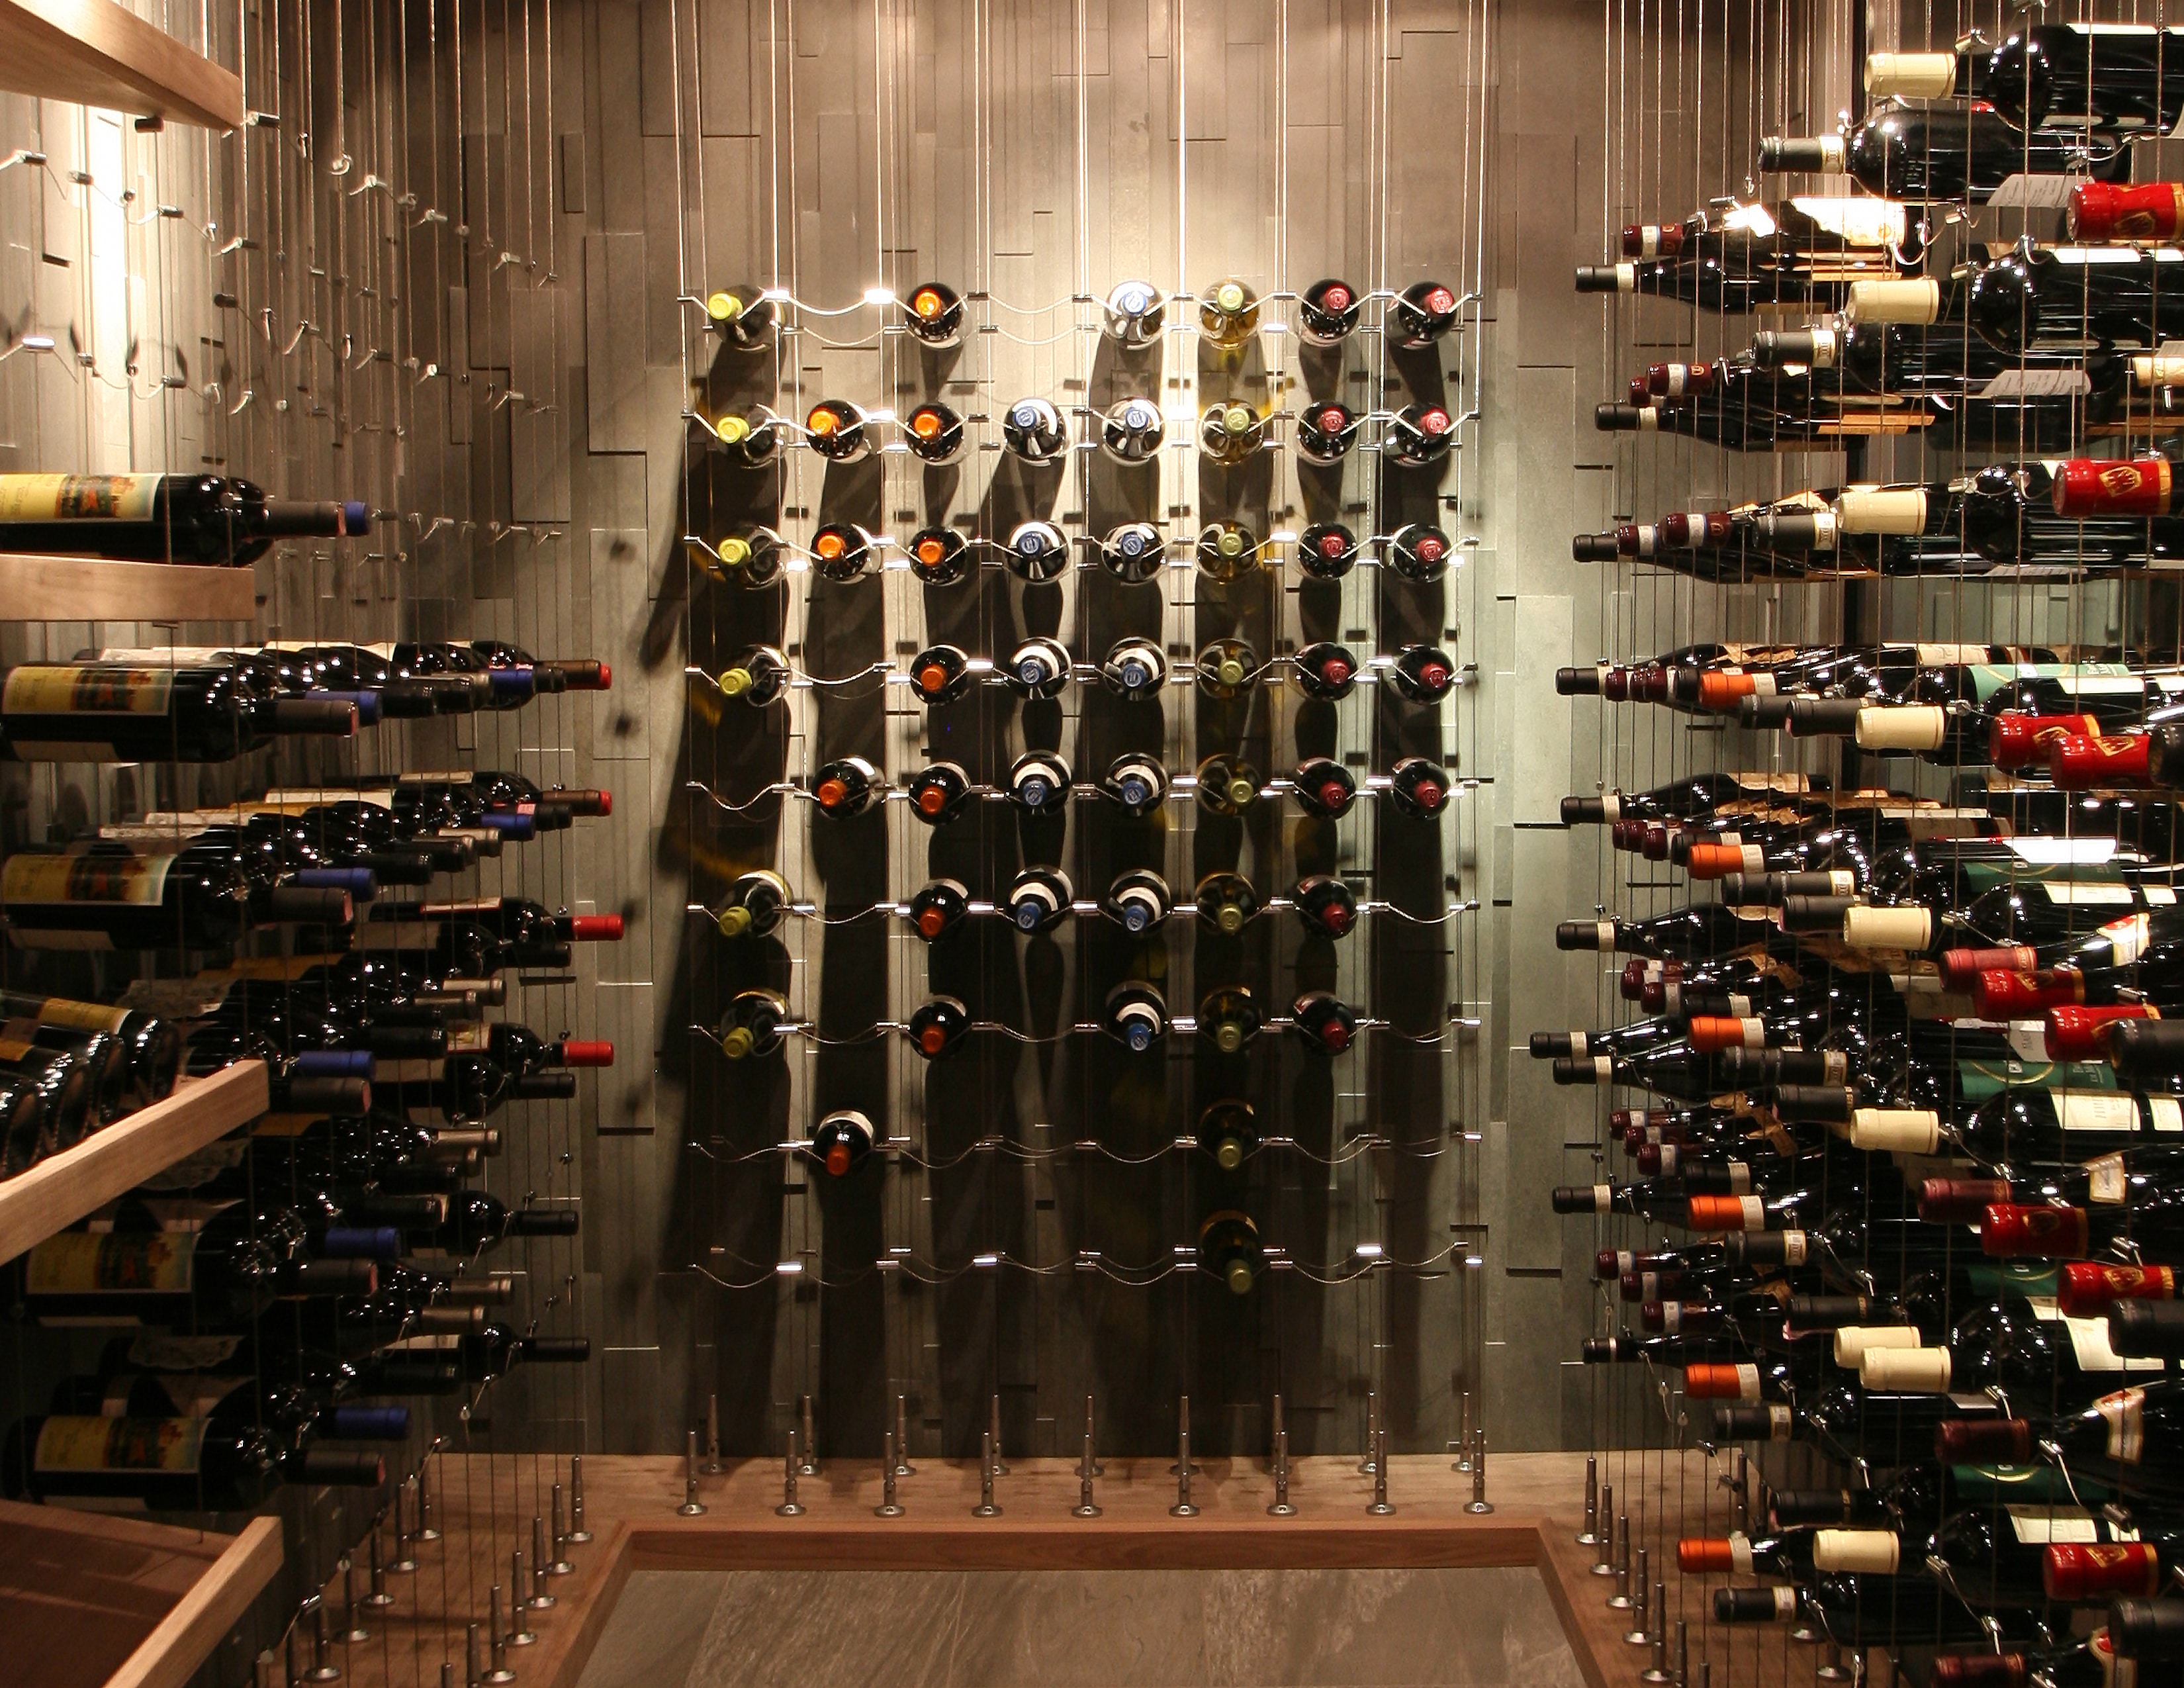 Get your own wine cellar designed by an expert now! Click here!